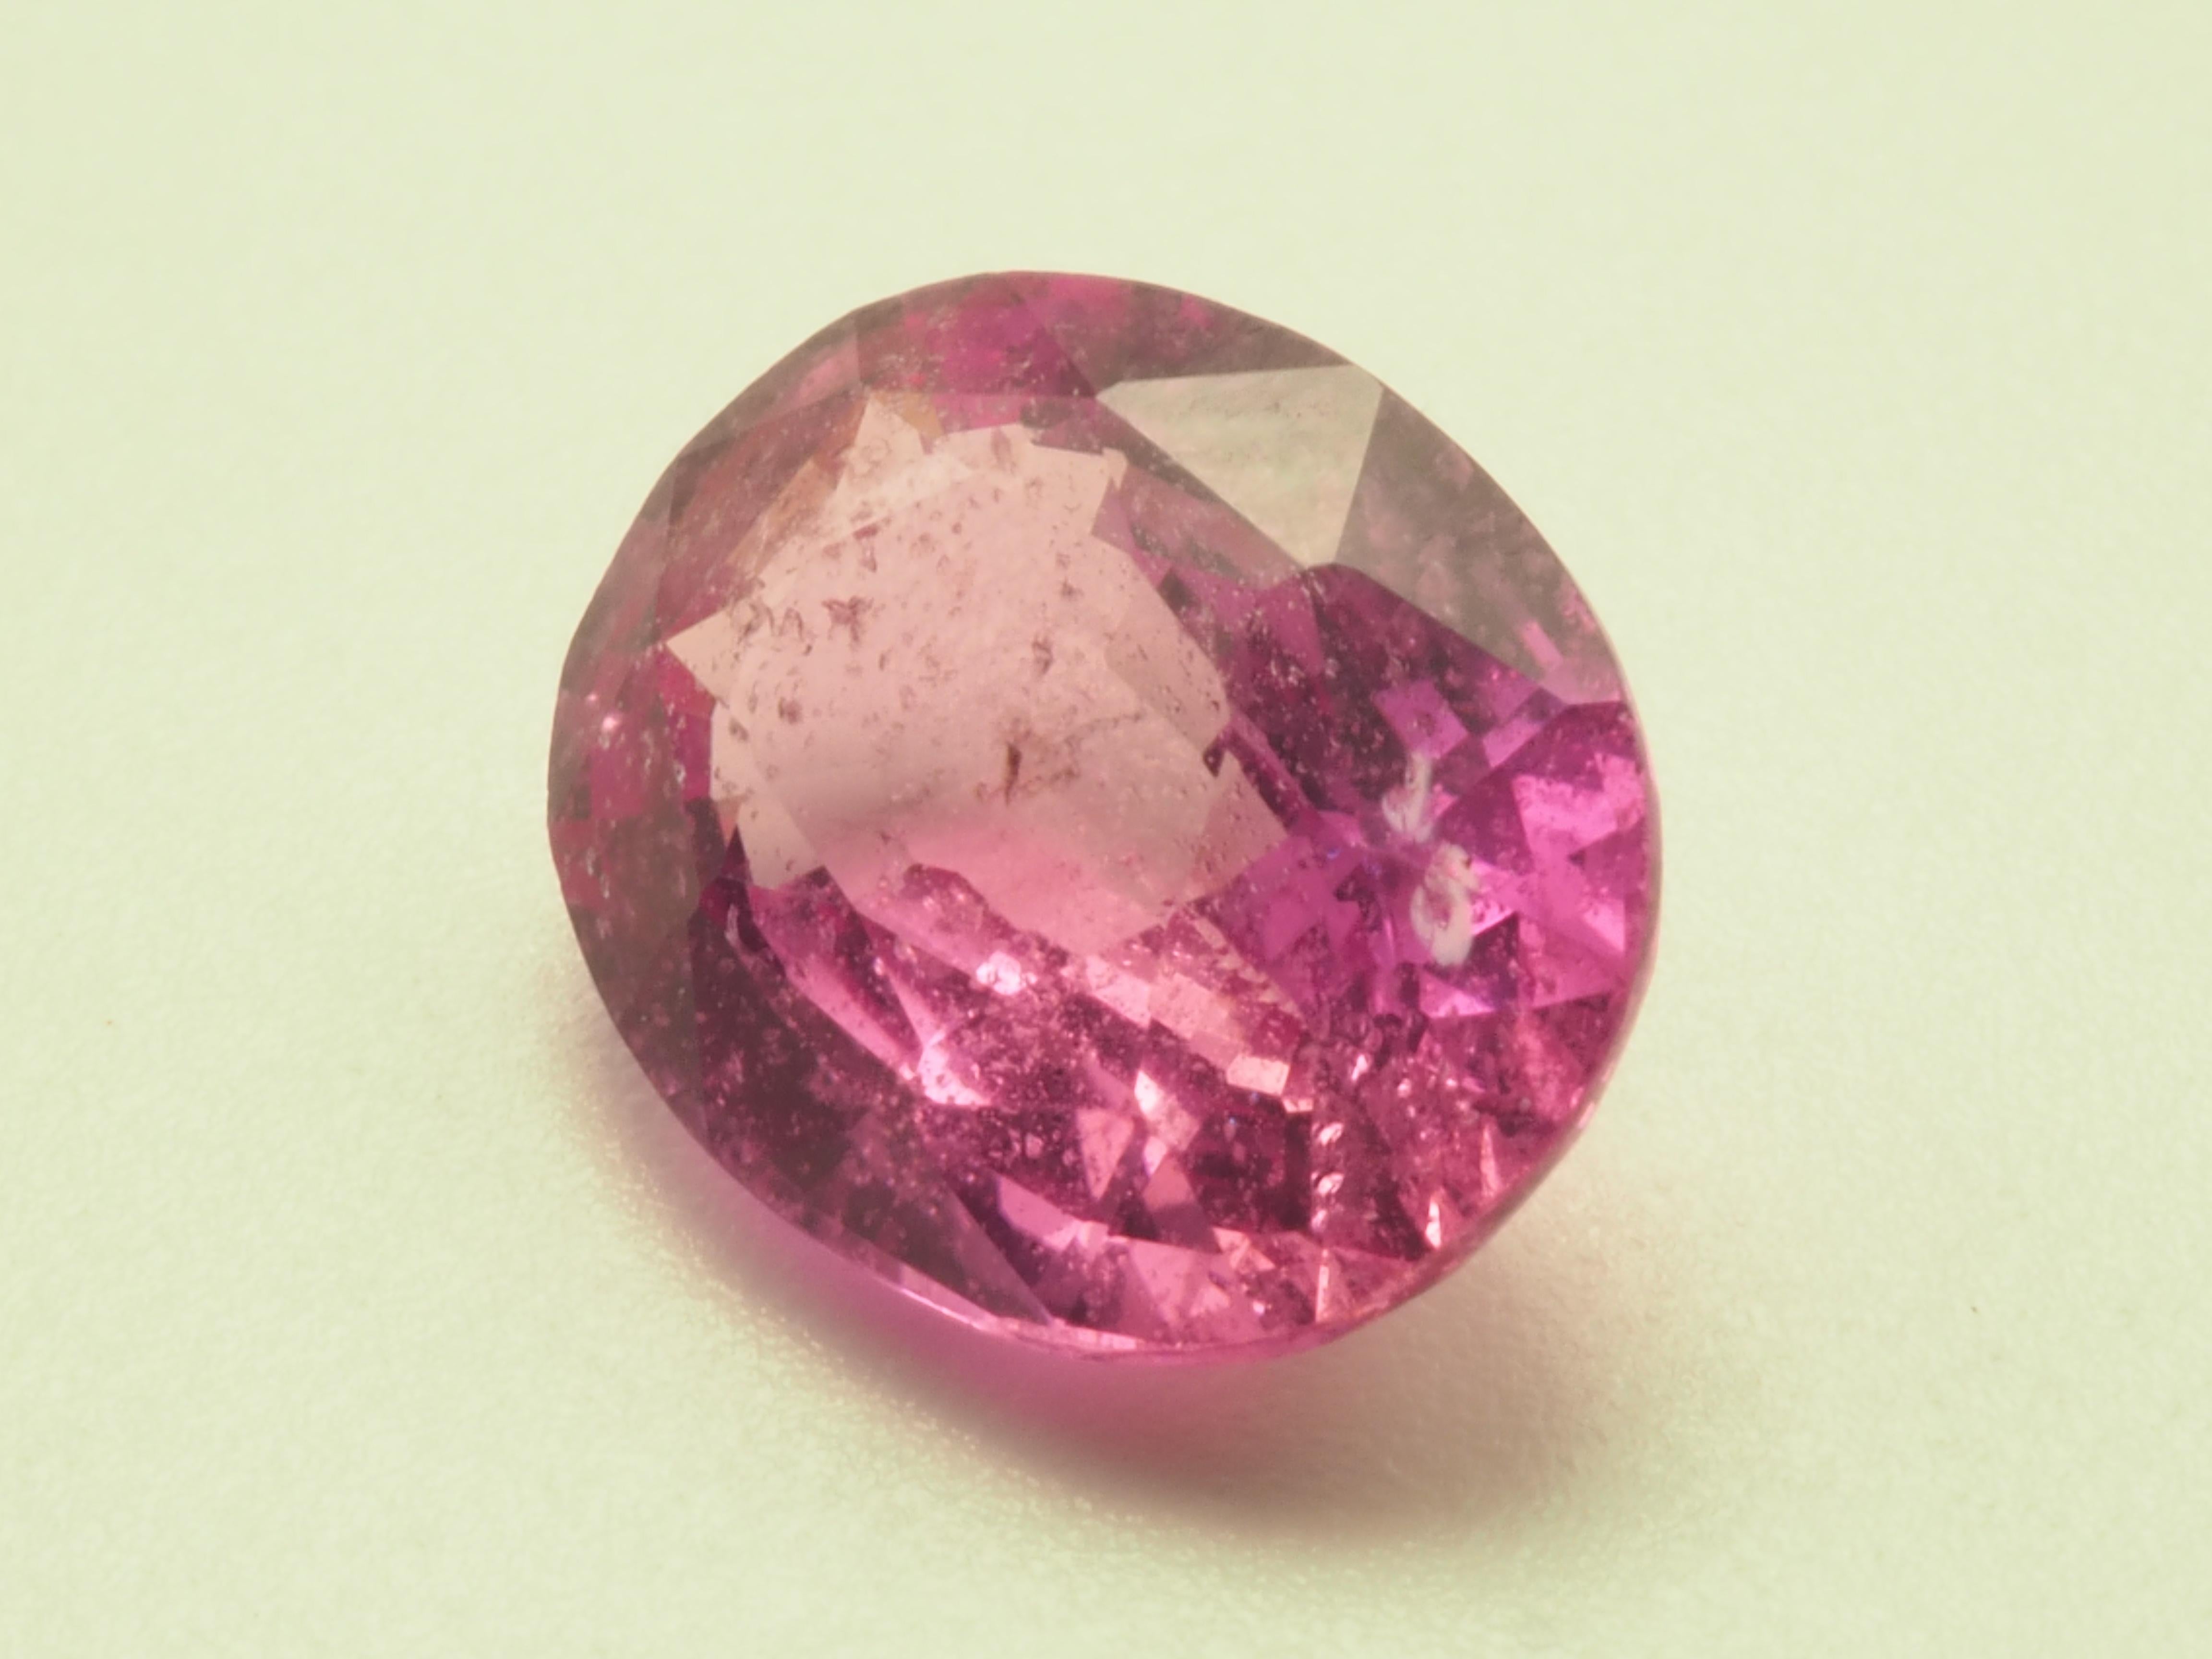 Sapphire fans please do not miss:
This particular pink sapphire has very good hot pink saturated color. The sapphire shape is oval step cut and was polished in Thailand. Some natural inclusions is visible with 10x scope otherwise very hard to see